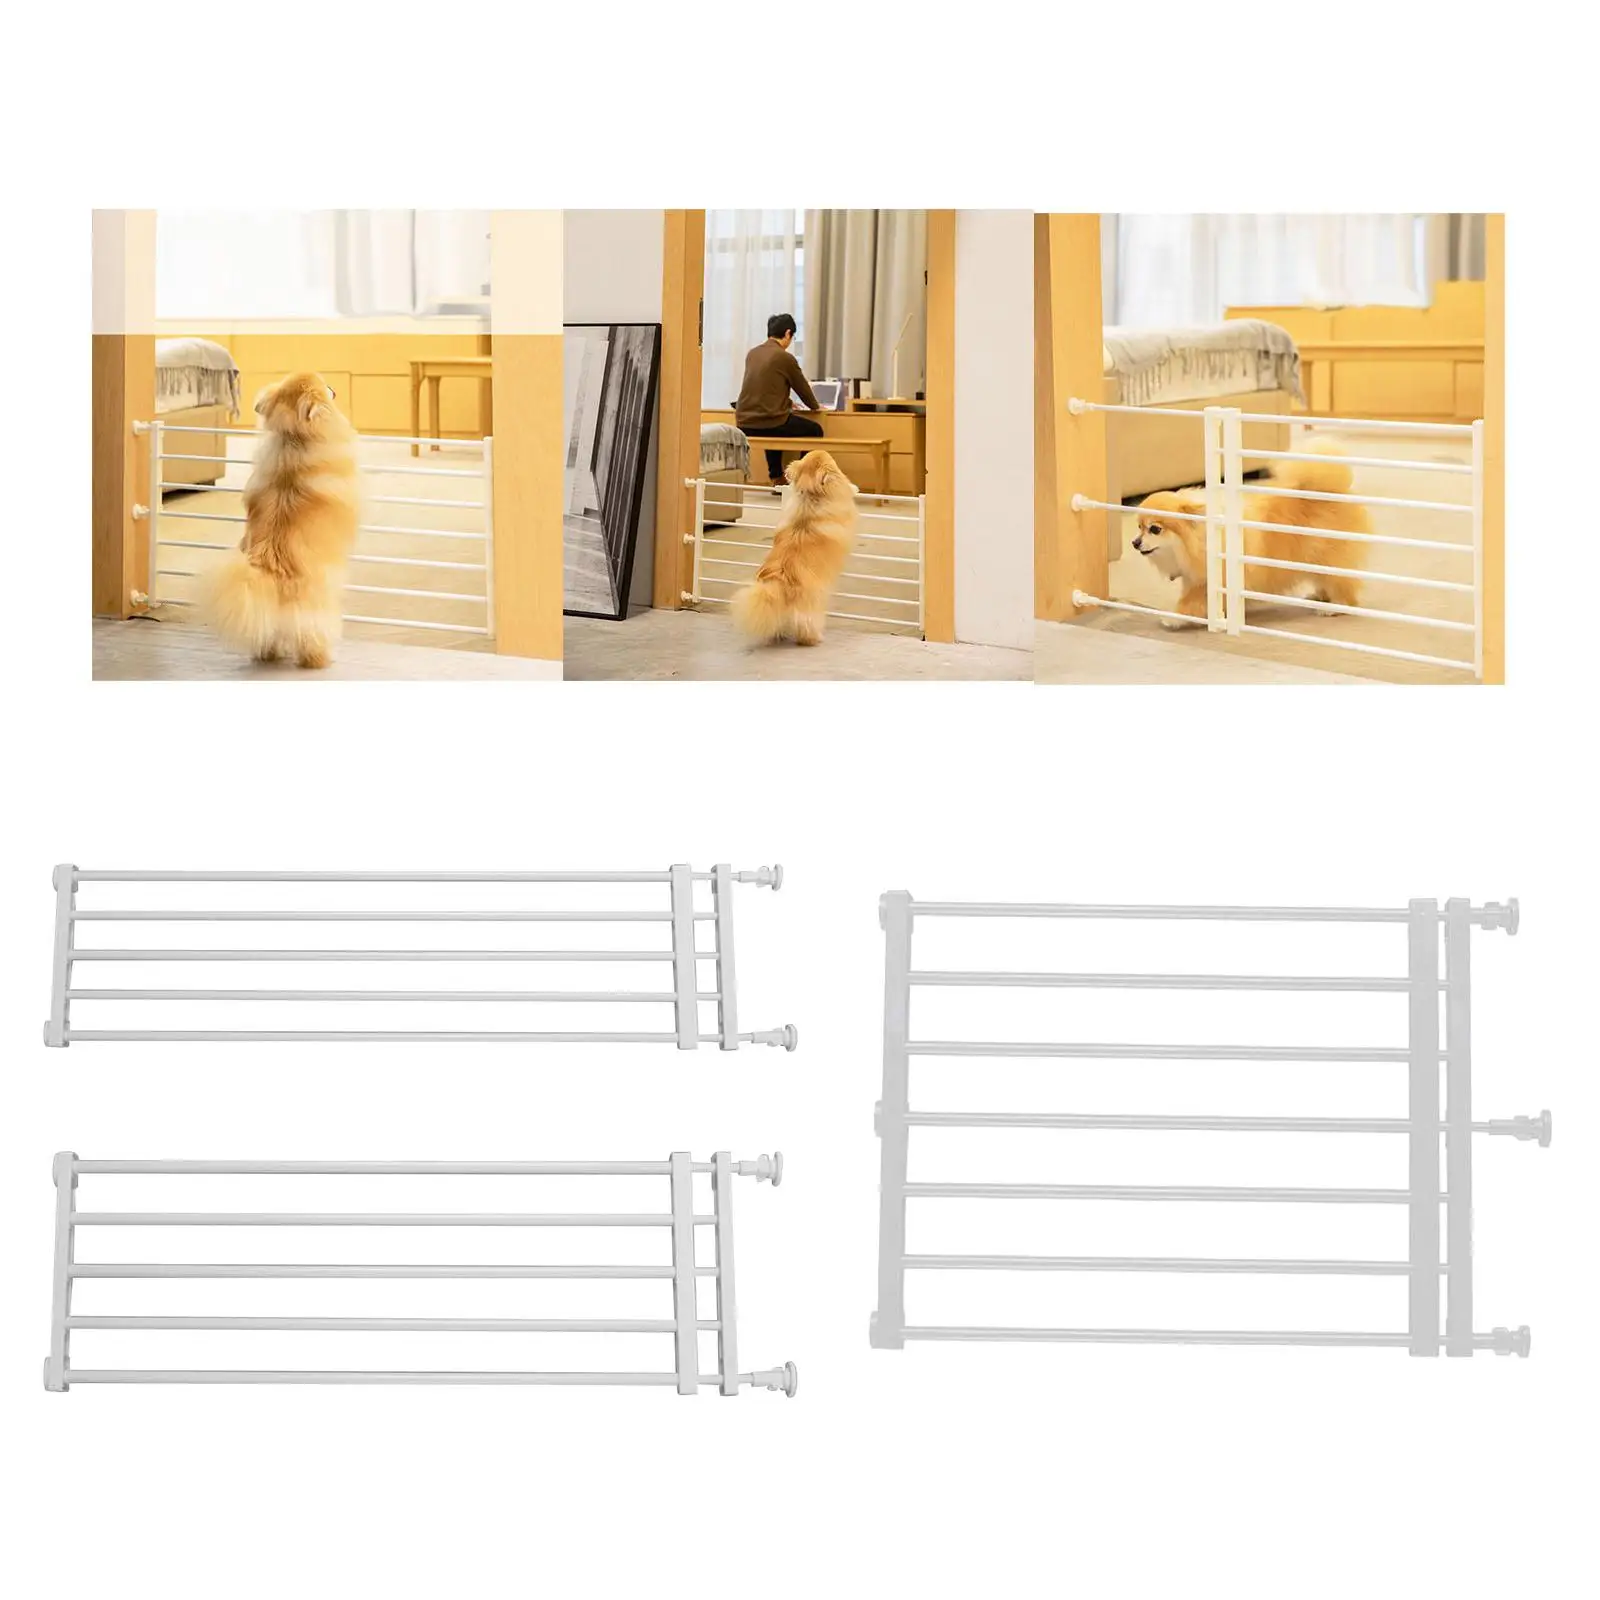 Expandable Dog Gate Adjustable Barrier for Lawn Patio Outdoor Small Medium Pet Doorway